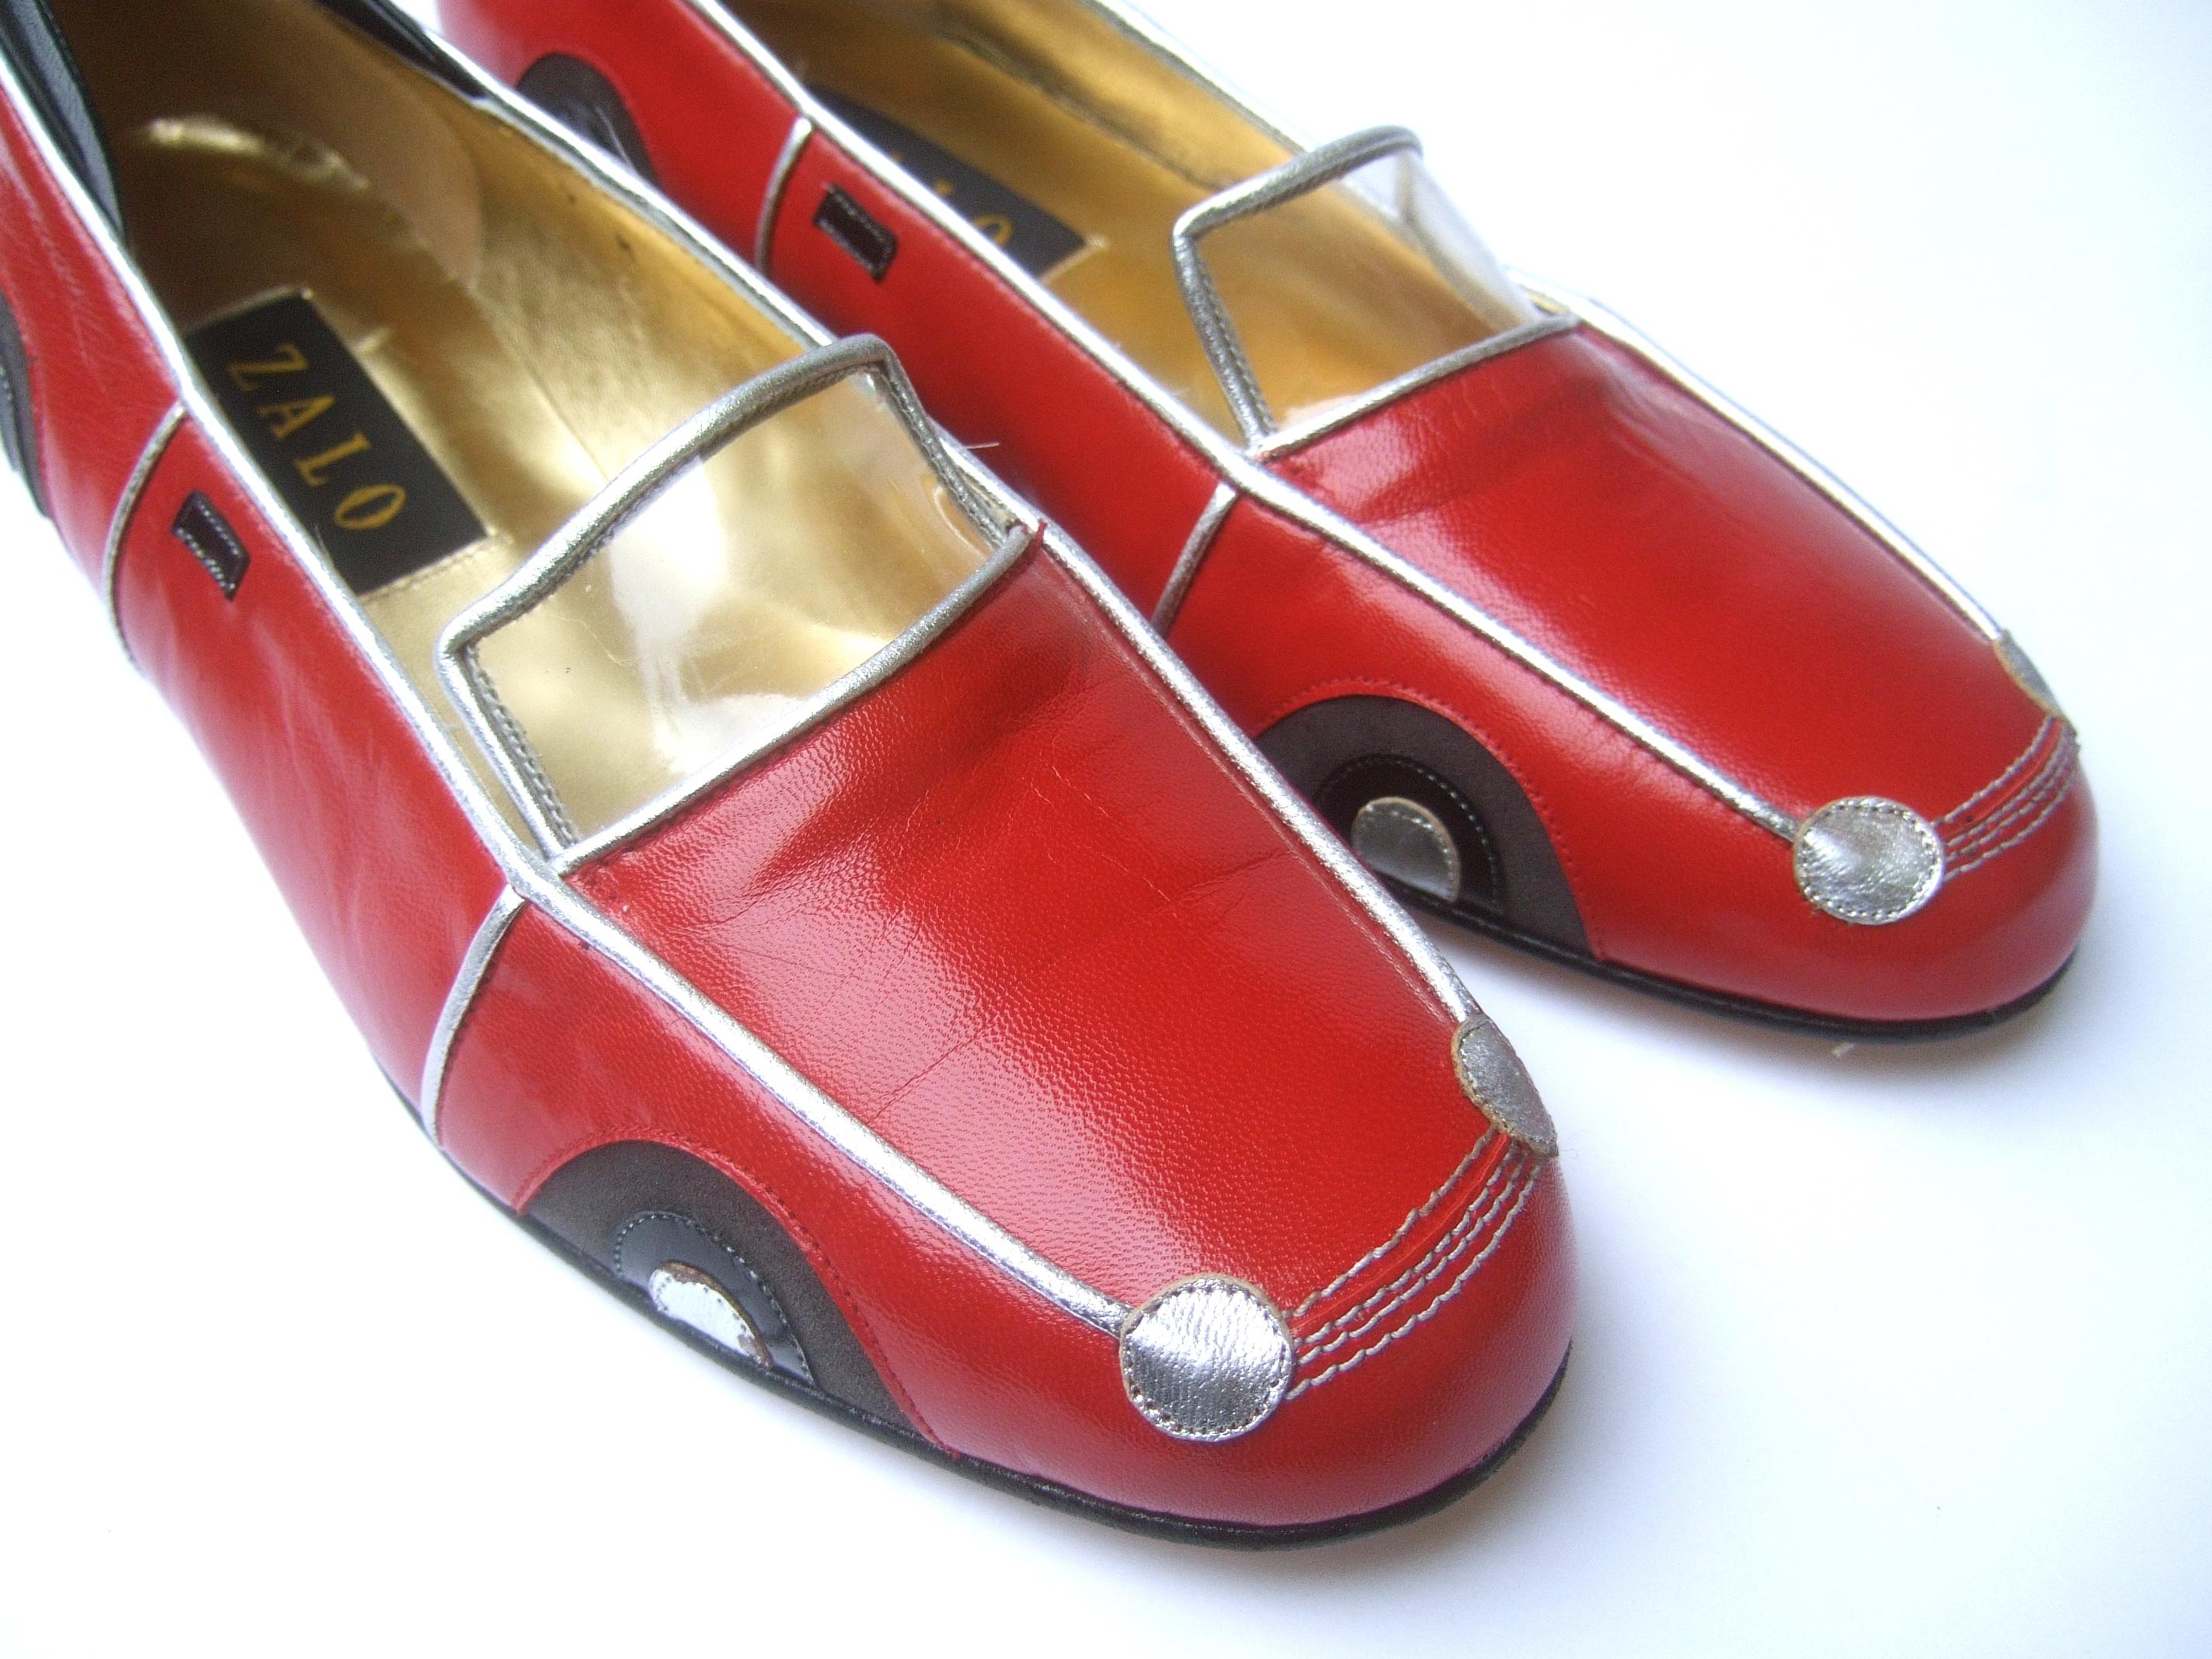 Whimsical Red Leather Sports Car Design Shoes by Zalo US Size 9 M c 1990 1